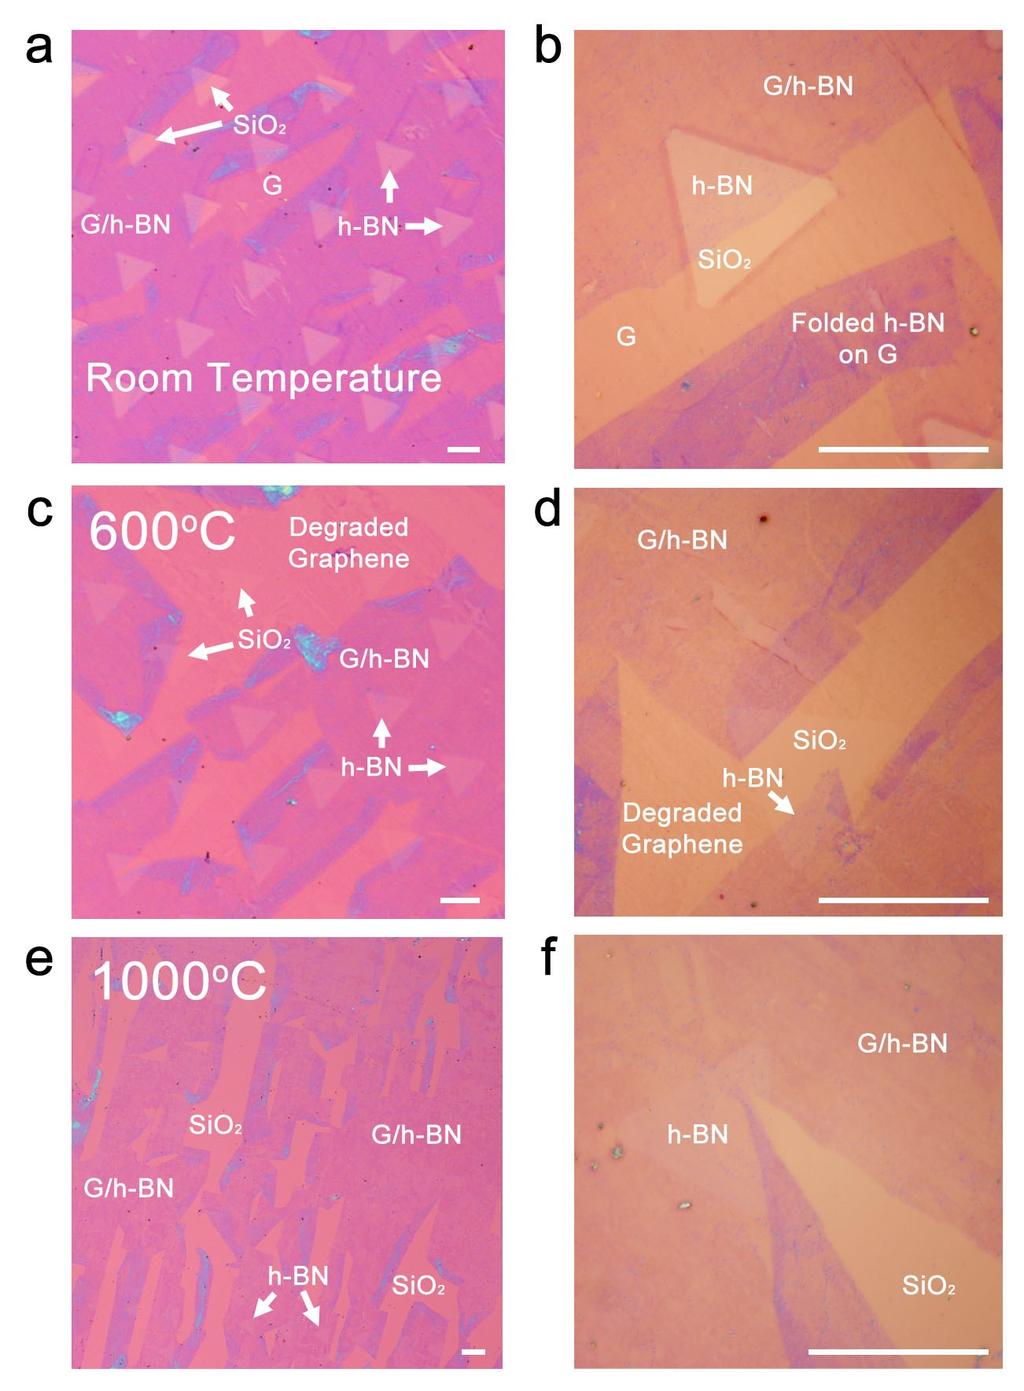 Supplementary Figure S10. Optical images of 2 nm h-bn coated graphene. (a) and (b) Morphologies of G/h-BN films at room temperature on the silica substrate.